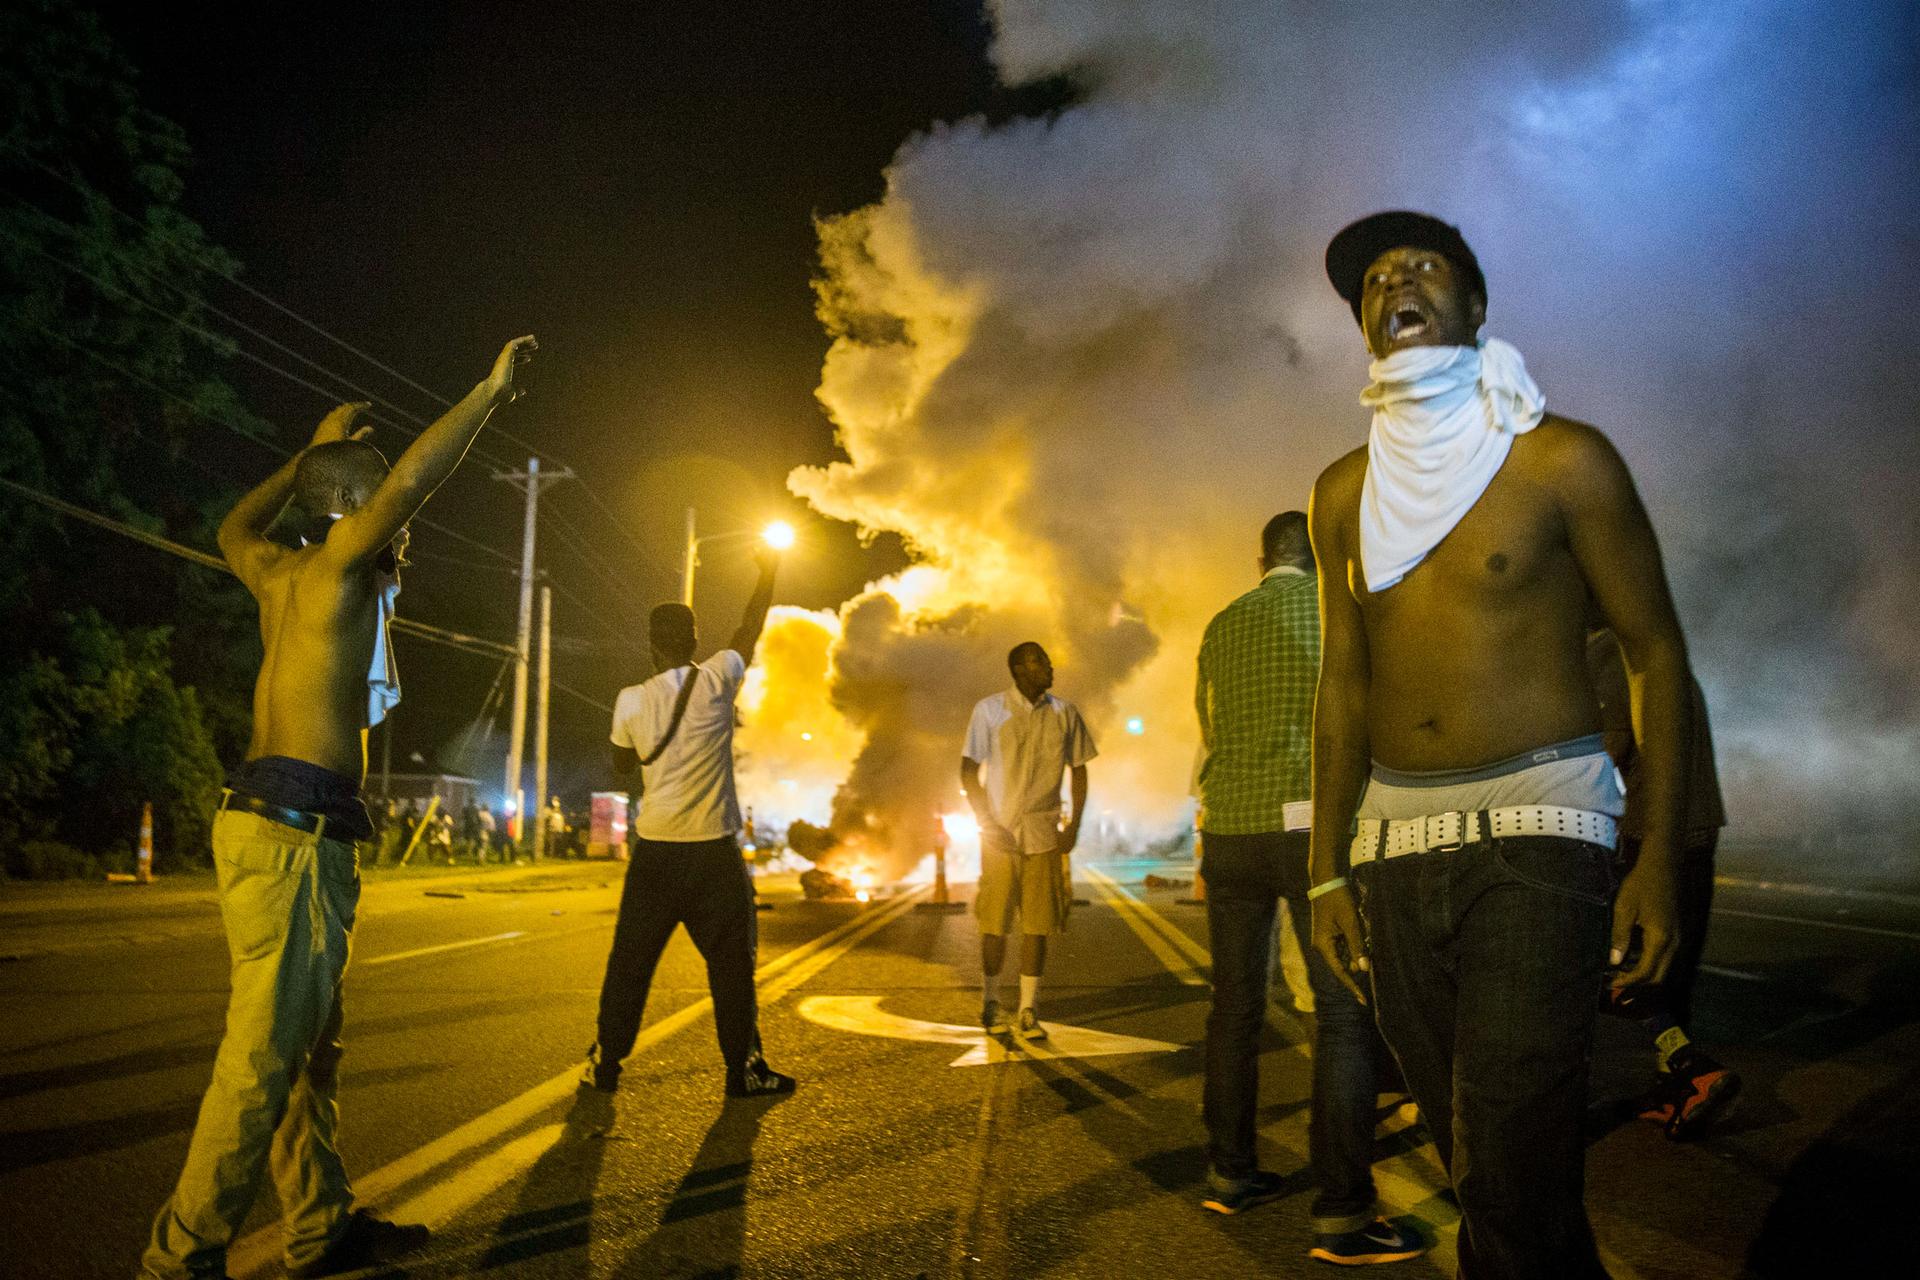 Men stand under the glow of a street light in the street with their hands up. In the distance is a cloud of tear gas.